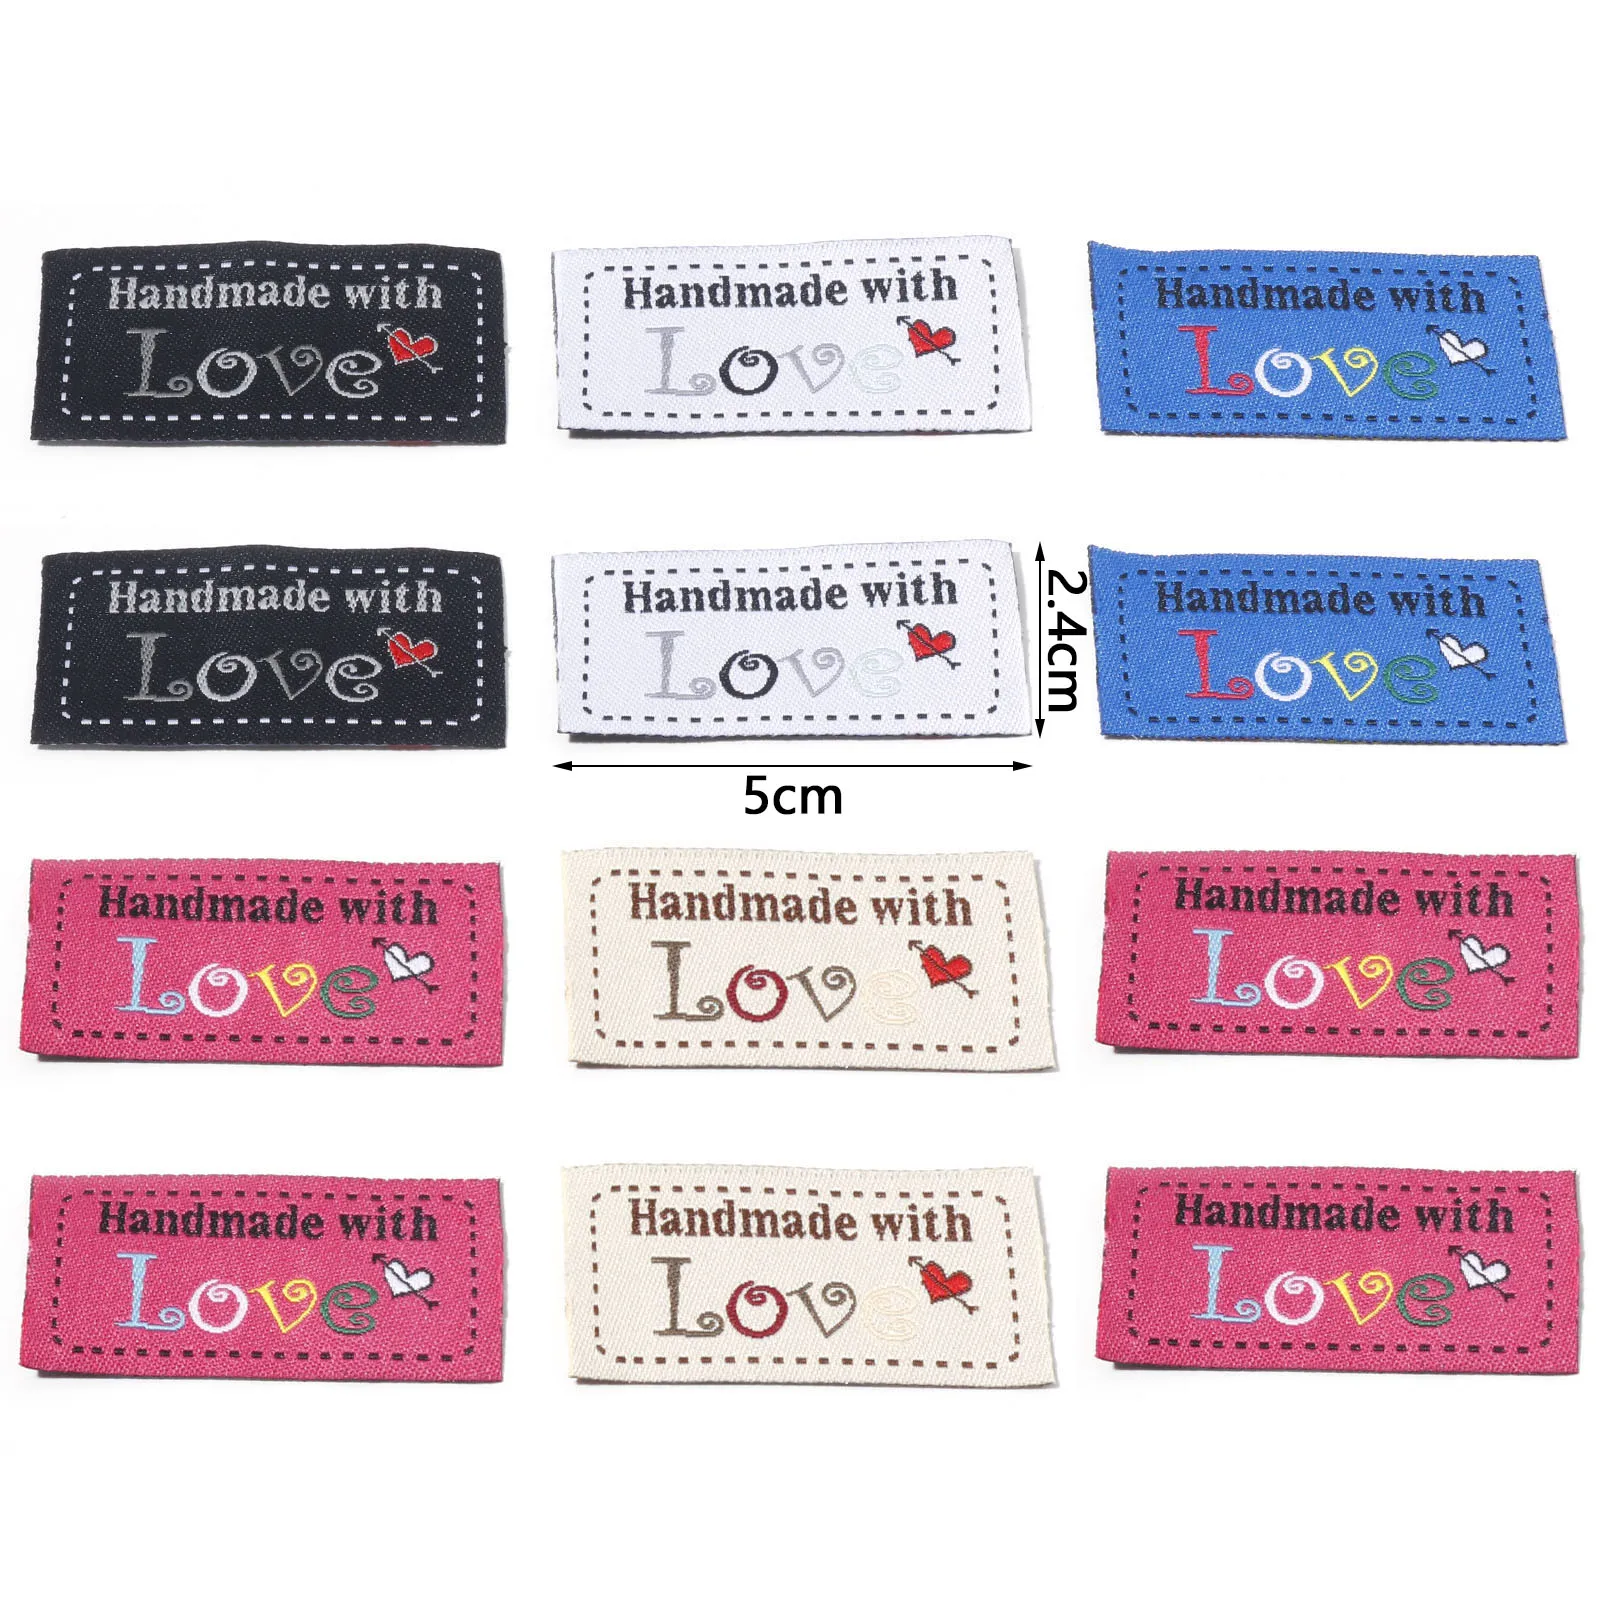 50Pcs Hand Made With Love Cloth Tags Handmade Labels For Clothes